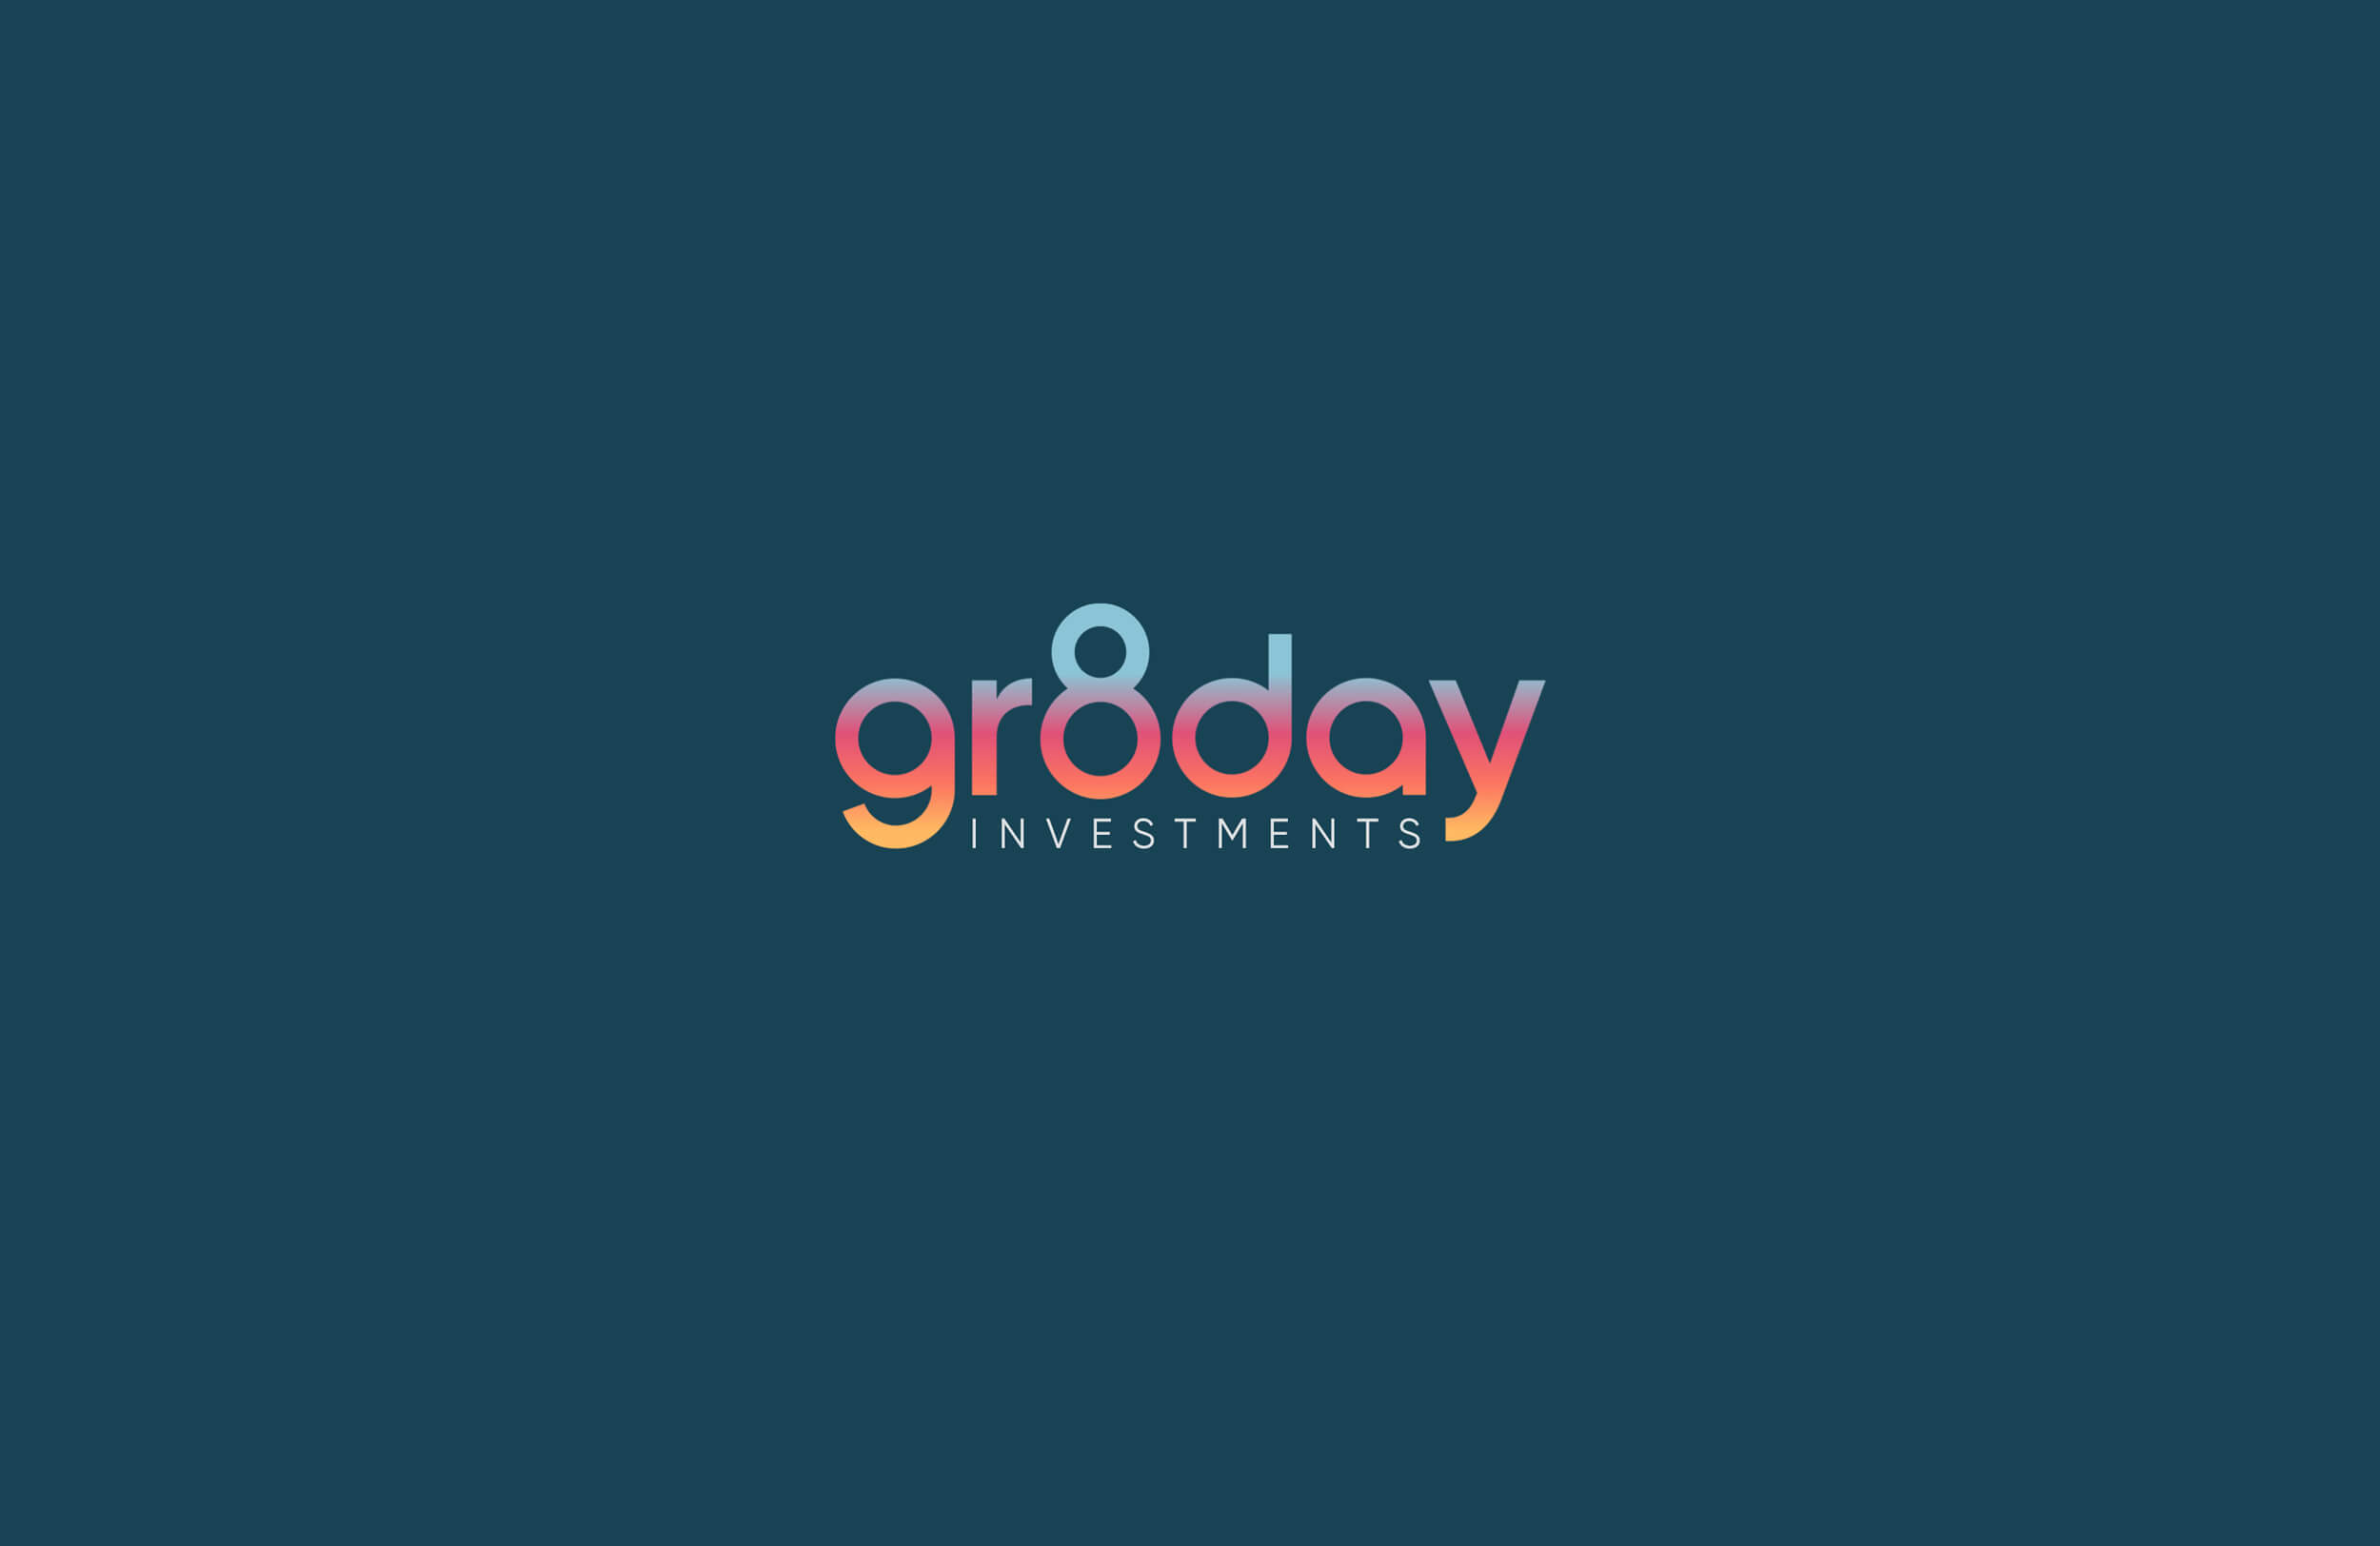 gr8day investments logo